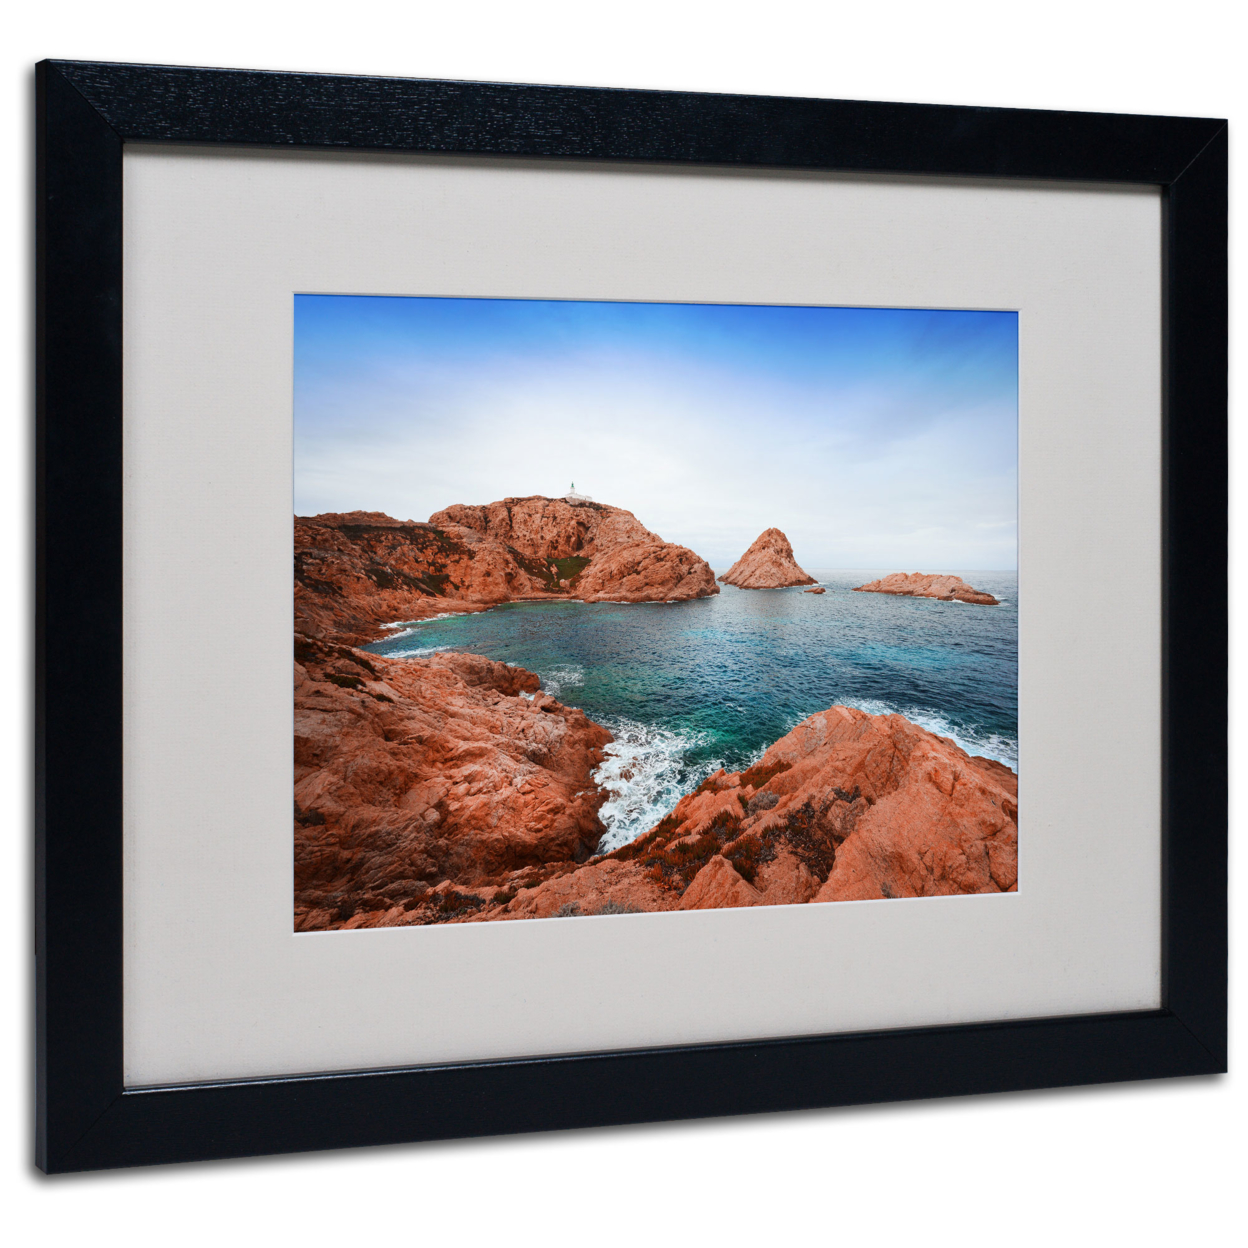 Philippe Sainte-Laudy 'Ile Rousse' Black Wooden Framed Art 18 X 22 Inches